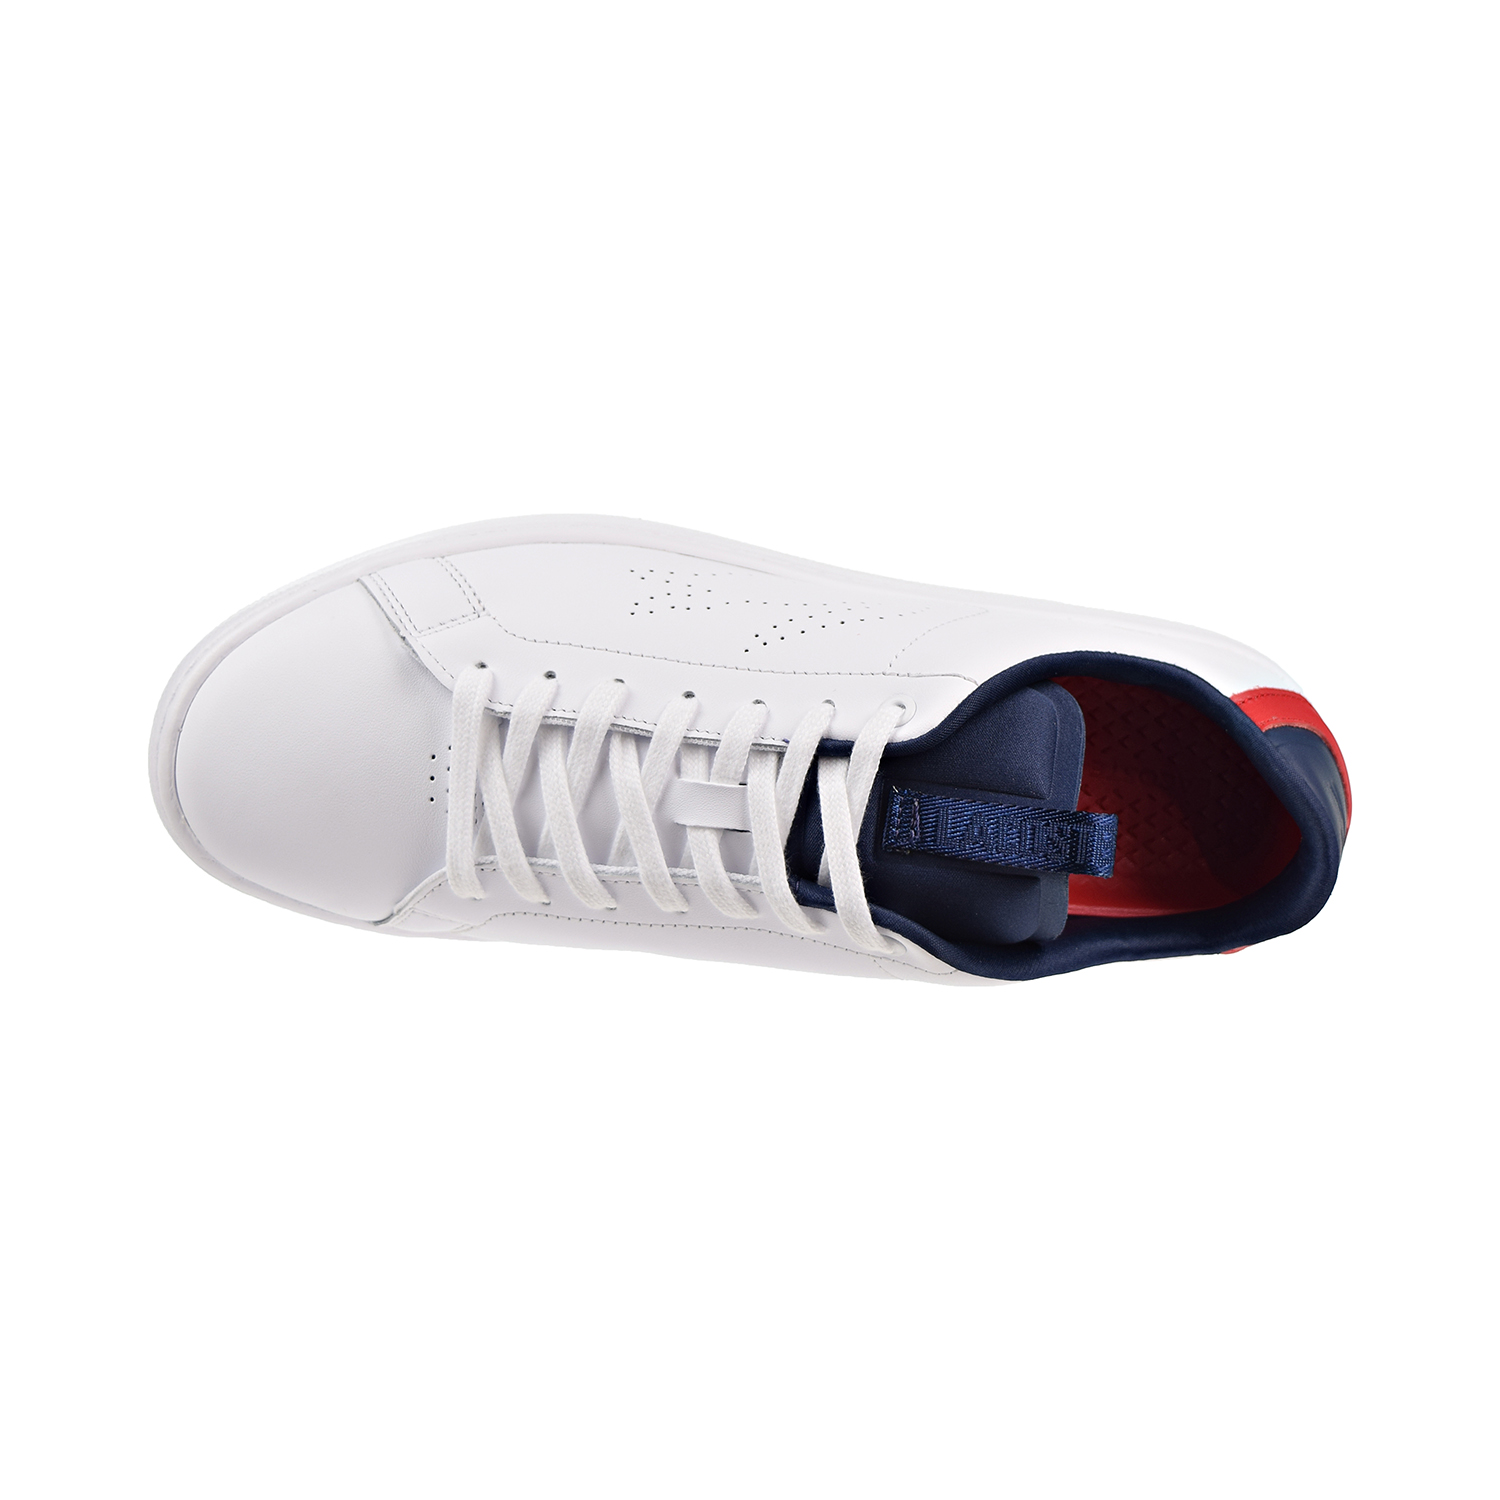 Lacoste Carnaby Evo Light-WT Men's Shoes White/Navy/Red  7-37sma0015-407